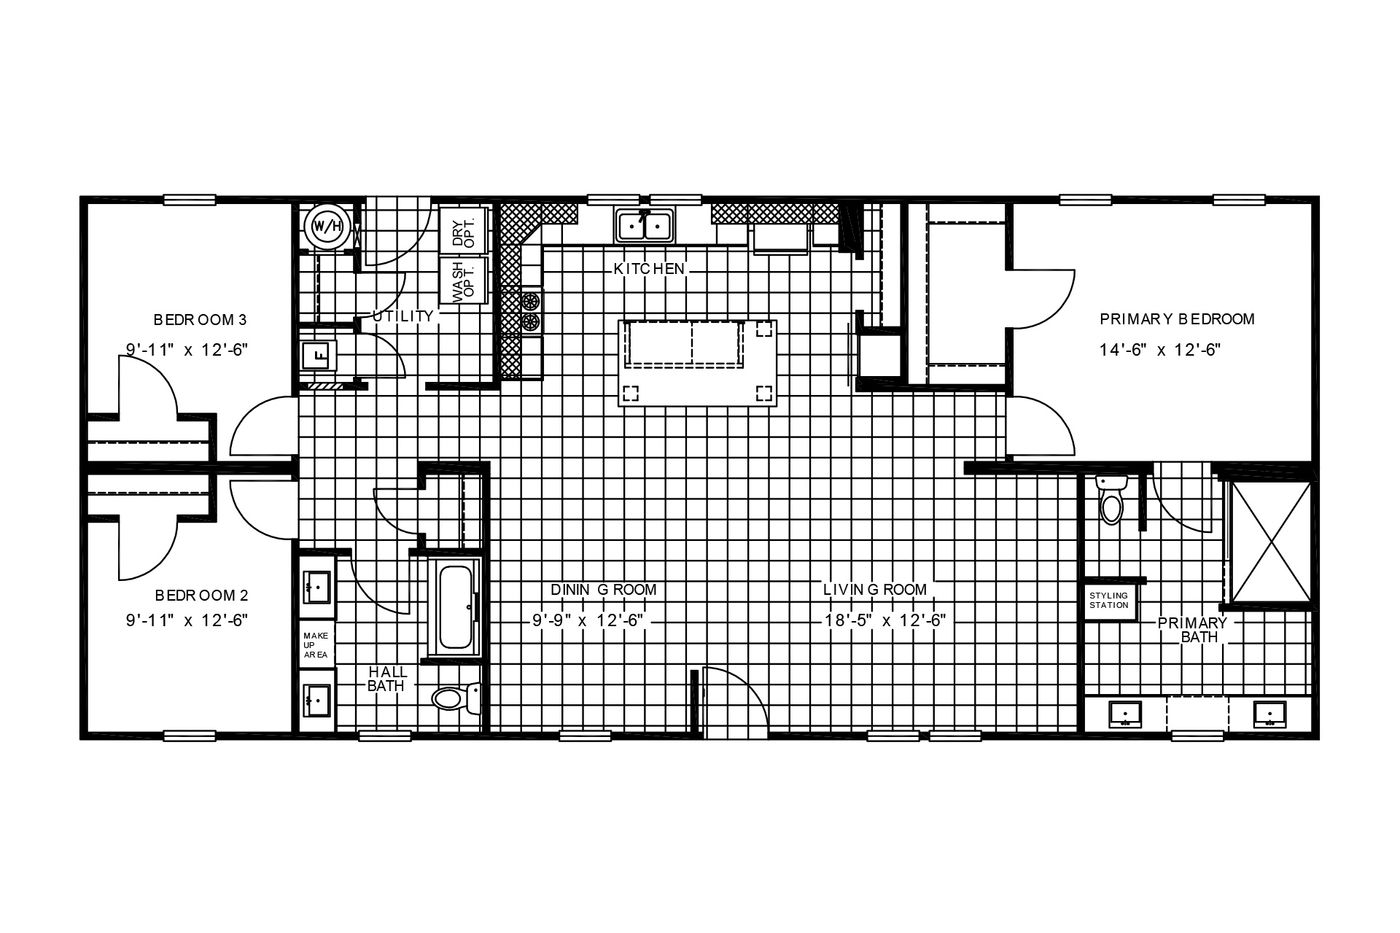 The THE FREEDOM BREEZE Floor Plan. This Manufactured Mobile Home features 3 bedrooms and 2 baths.